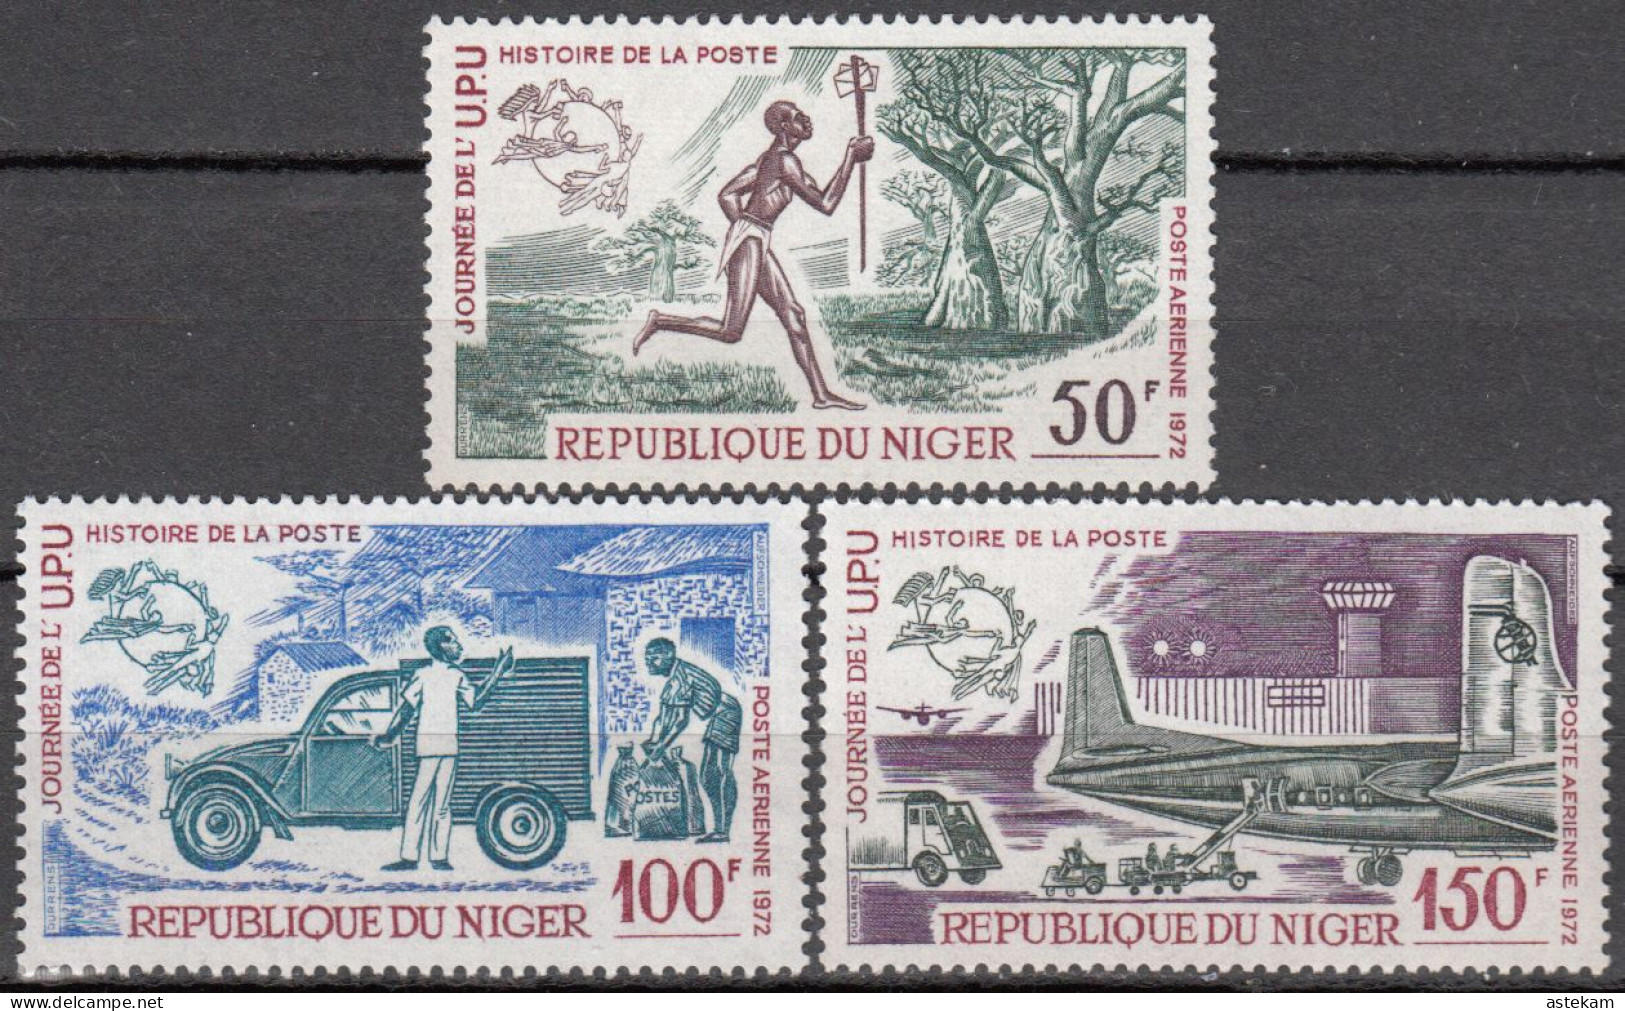 NIGER 1972, UPU, POSTAL TRANSPORT, AIRPLANES, COMPLETE MNH SERIES With GOOD QUALITY, *** - Níger (1960-...)